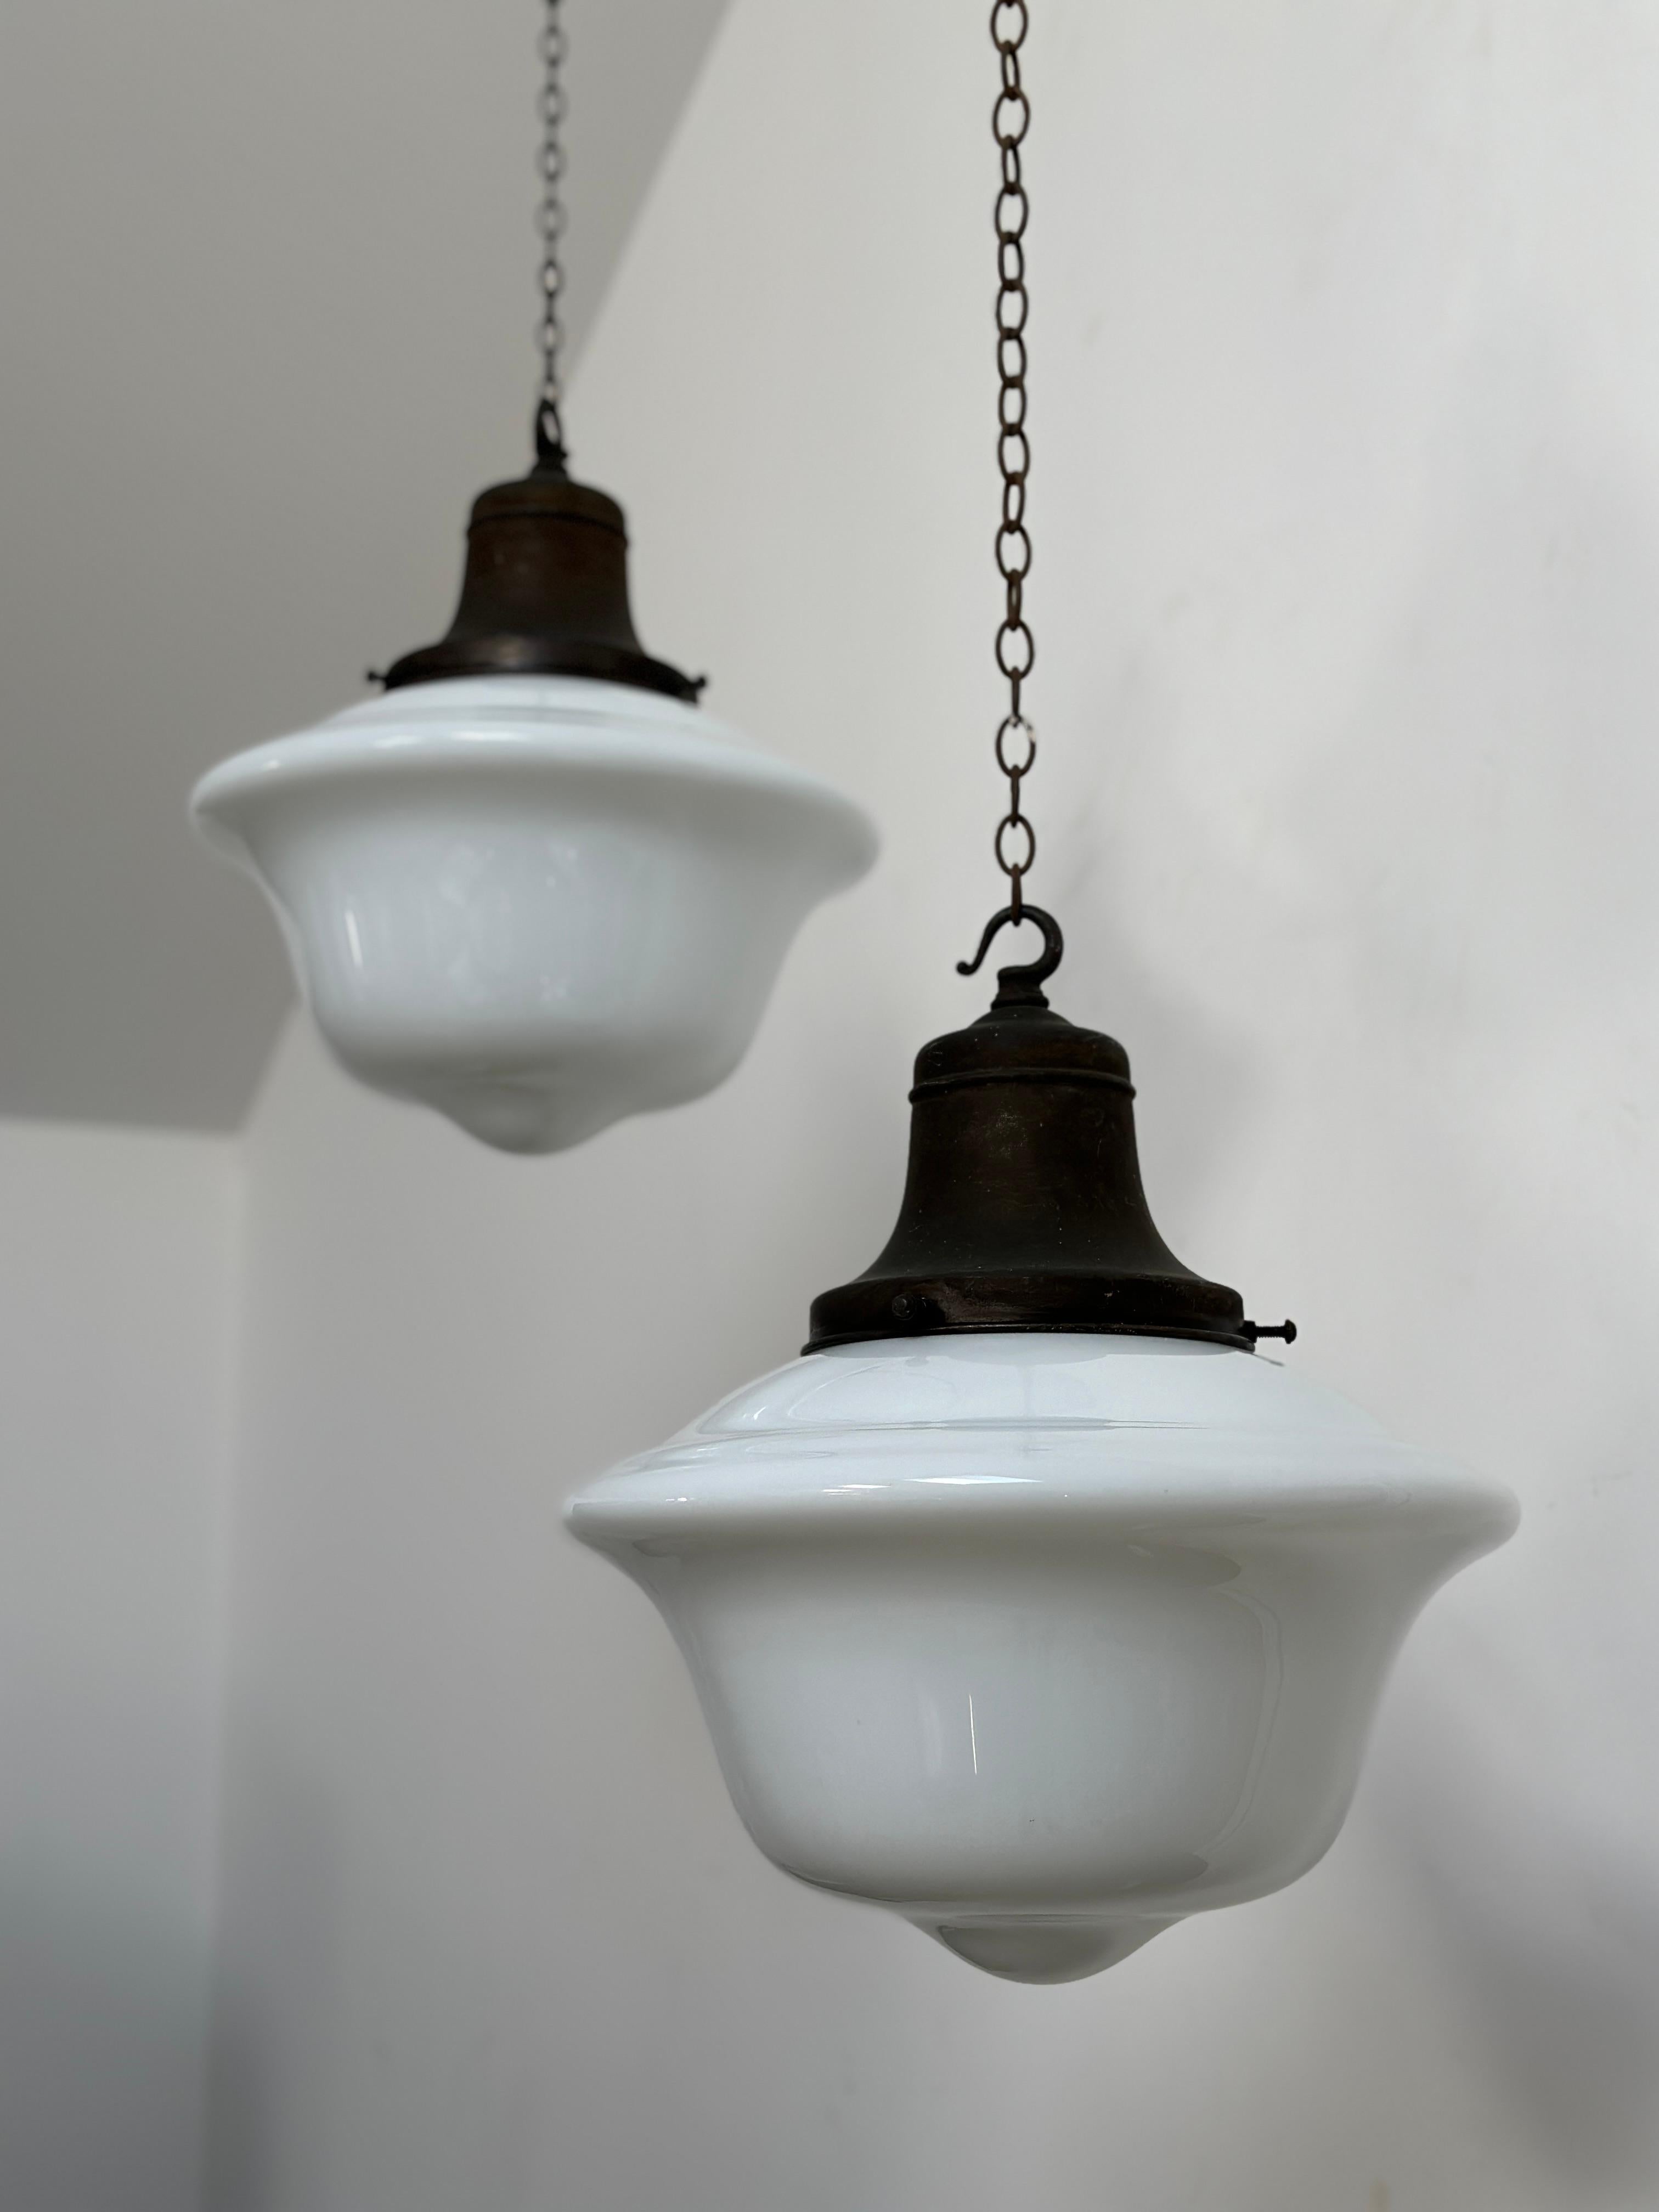 Run Set Antique Vintage Church Opaline Milk Glass Ceiling Pendants Light Lamp In Good Condition For Sale In Sale, GB